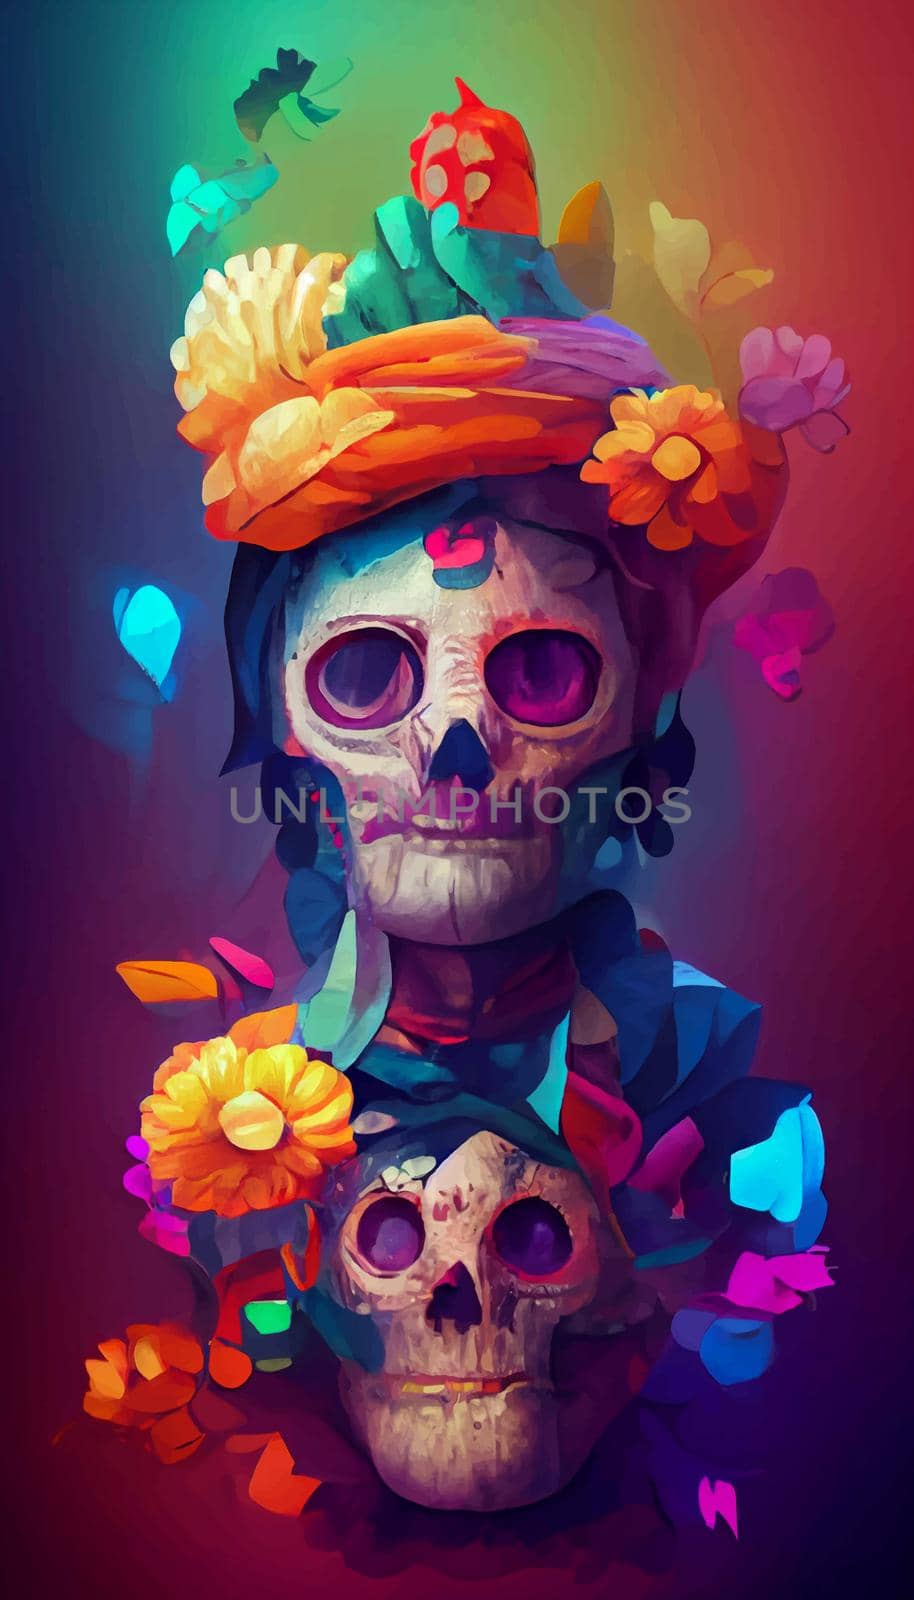 beautiful illustration of the Day of the Dead, Mexican tradition. colorful wallpaper of the day of the dead. catrin catrina.